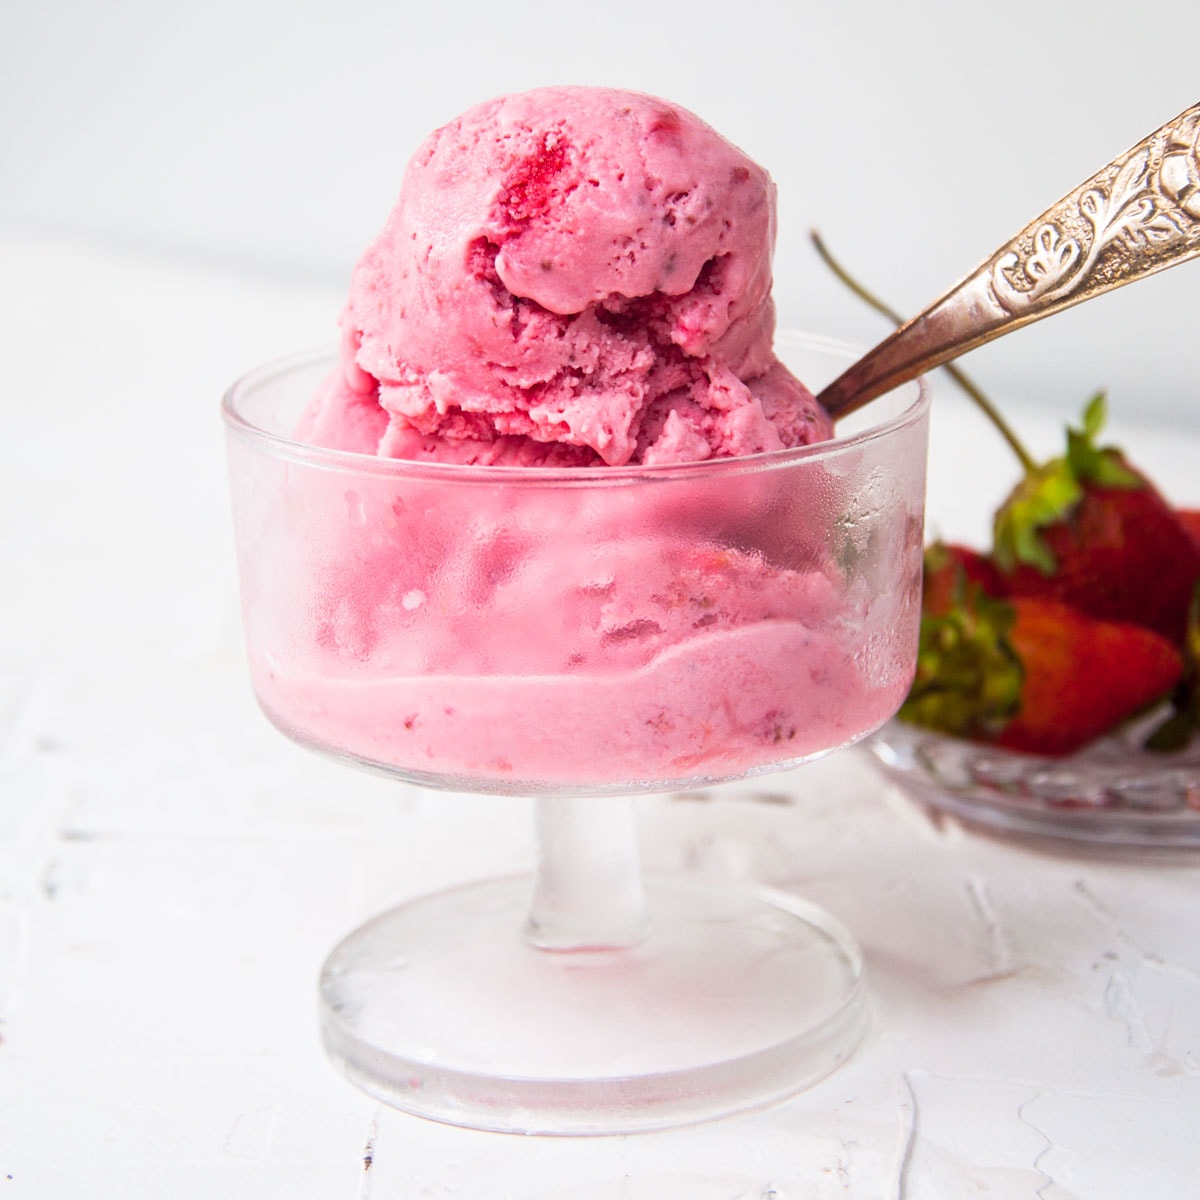 Homemade Strawberry Ice Cream – If You Give a Blonde a Kitchen